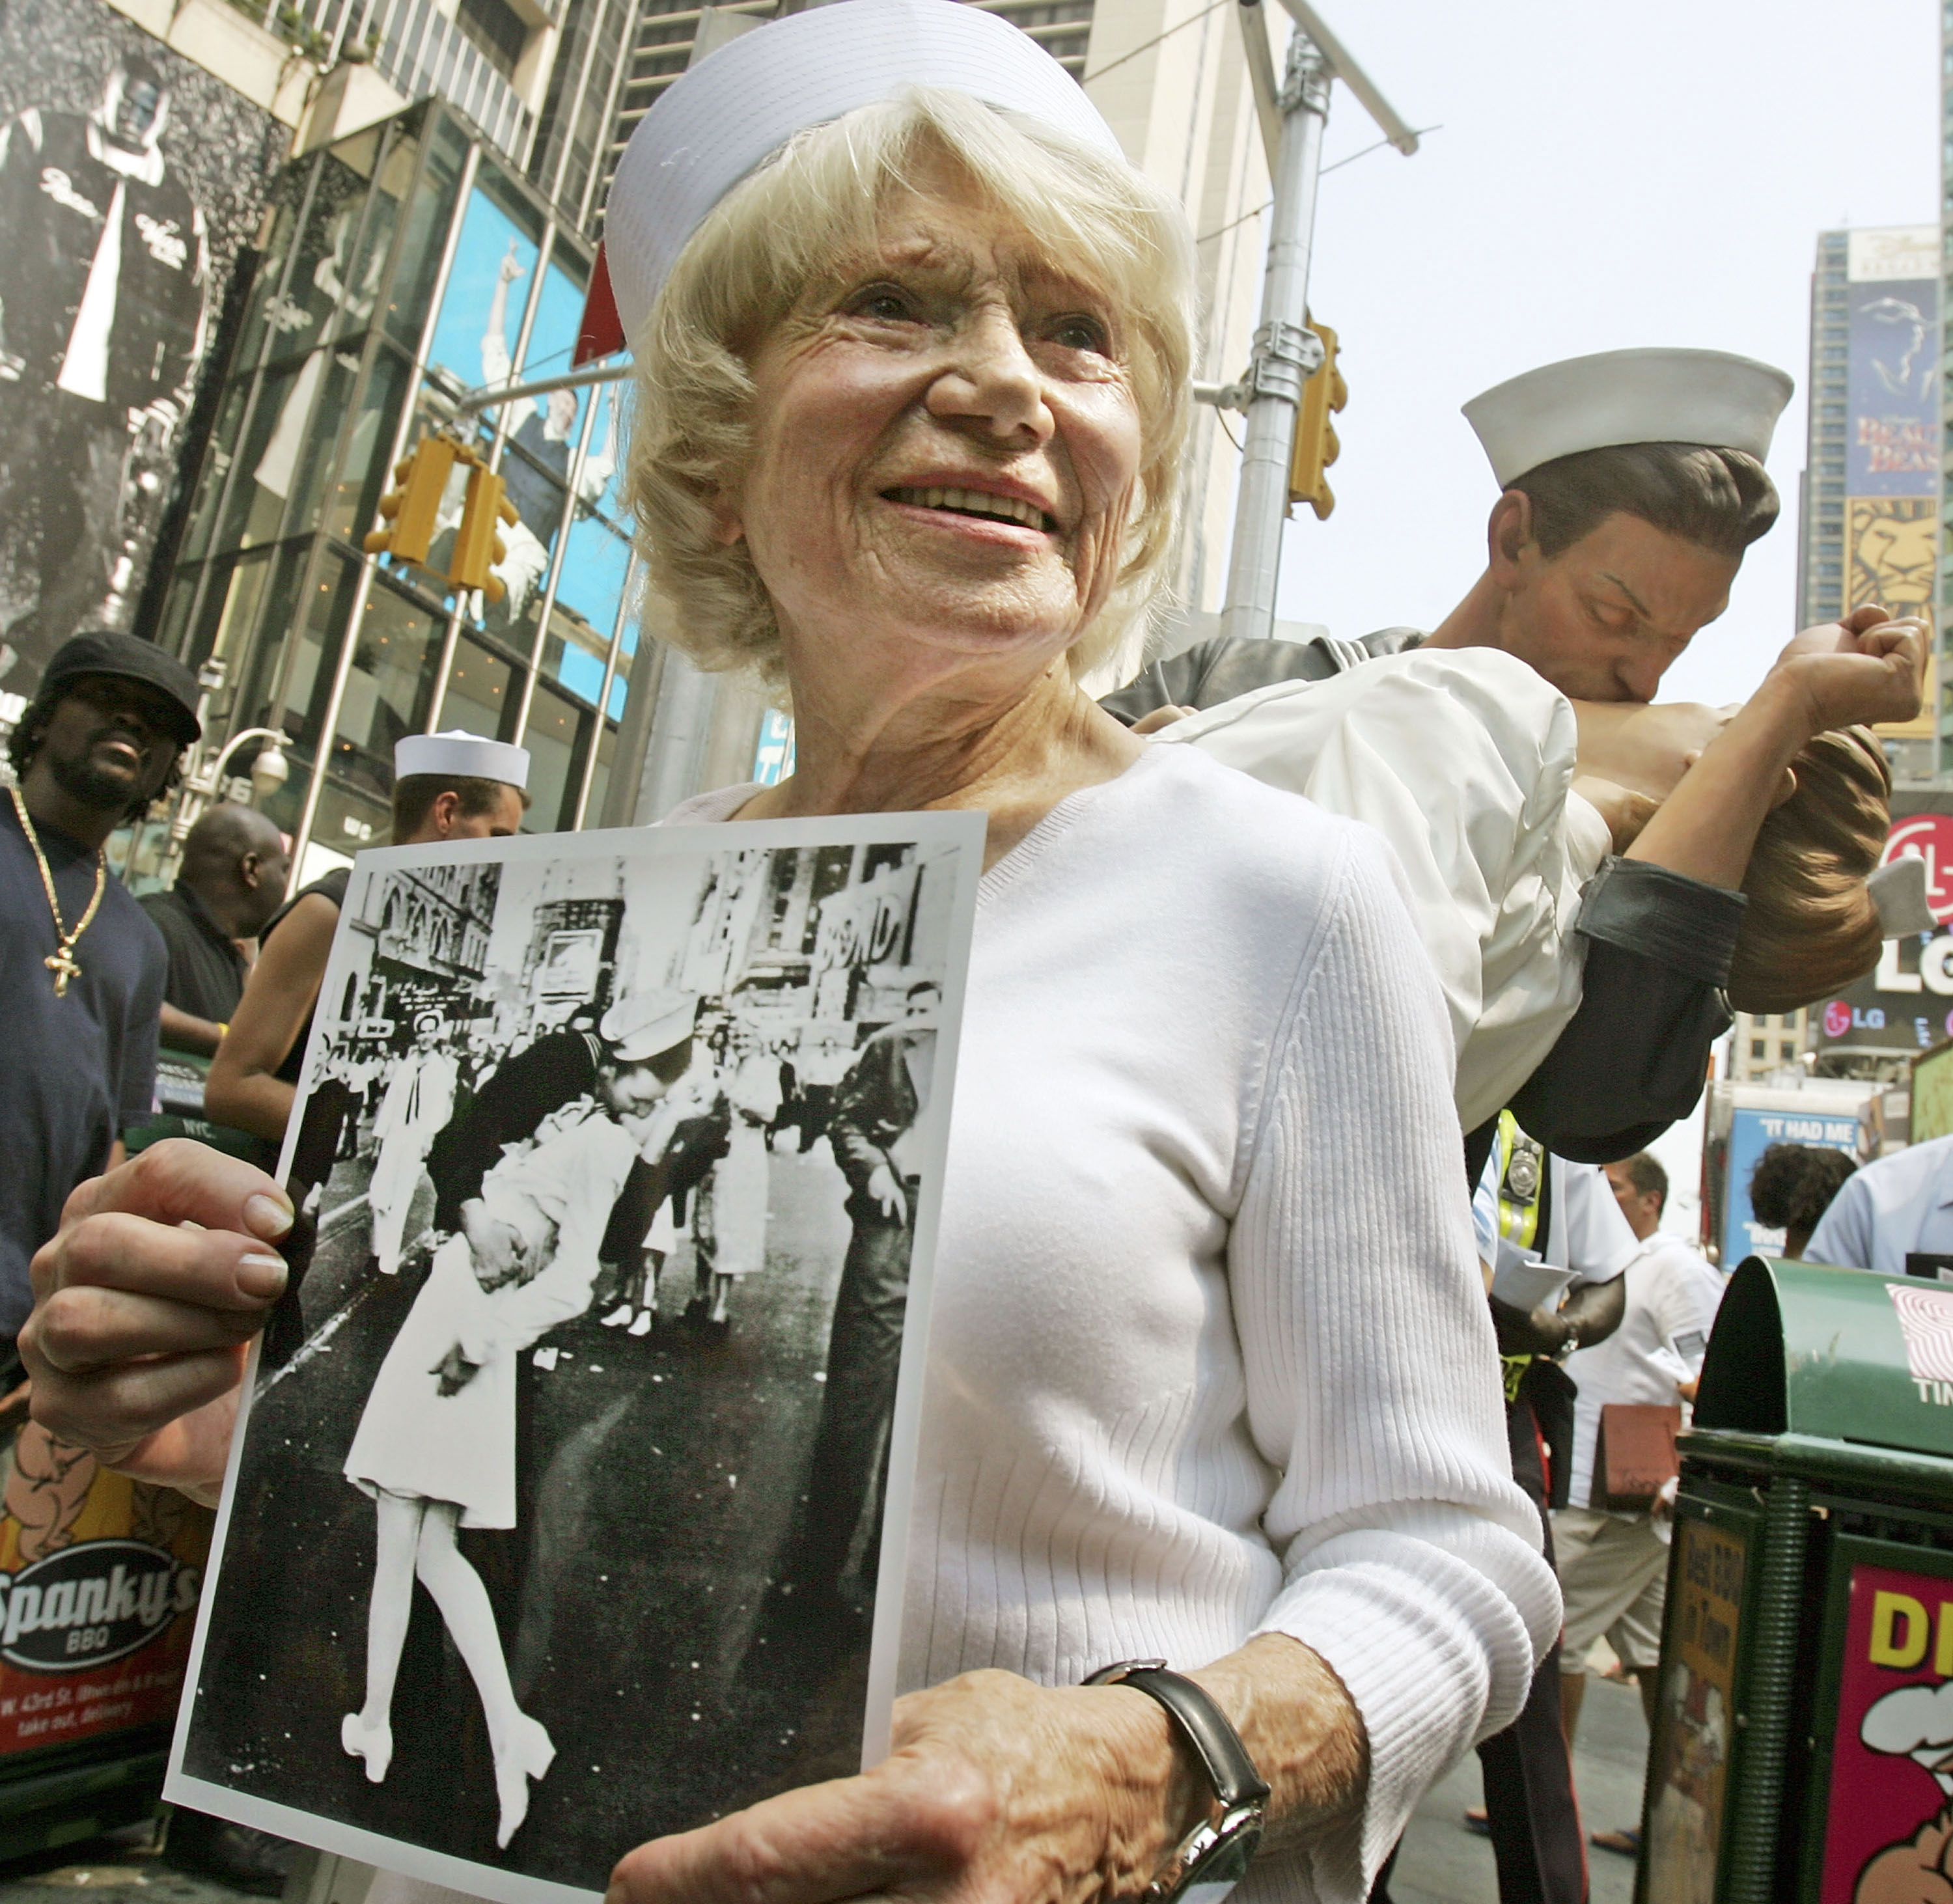 NEW YORK - AUGUST 11:  Eighty six-year-old Edith Shain stands in Times Square in front of a statue of her famous kiss with a sailor on V-J Day at the end of World War II August 11, 2005 in New York City. The famous kiss was photographed by Alfred Eisenstaedt and the unveiling of the statue coincides with the 60th anniversary of the end of World War II on August 14, 1945. The sailor in the photograph has never been positively identified.  (Photo by Mario Tama/Getty Images)